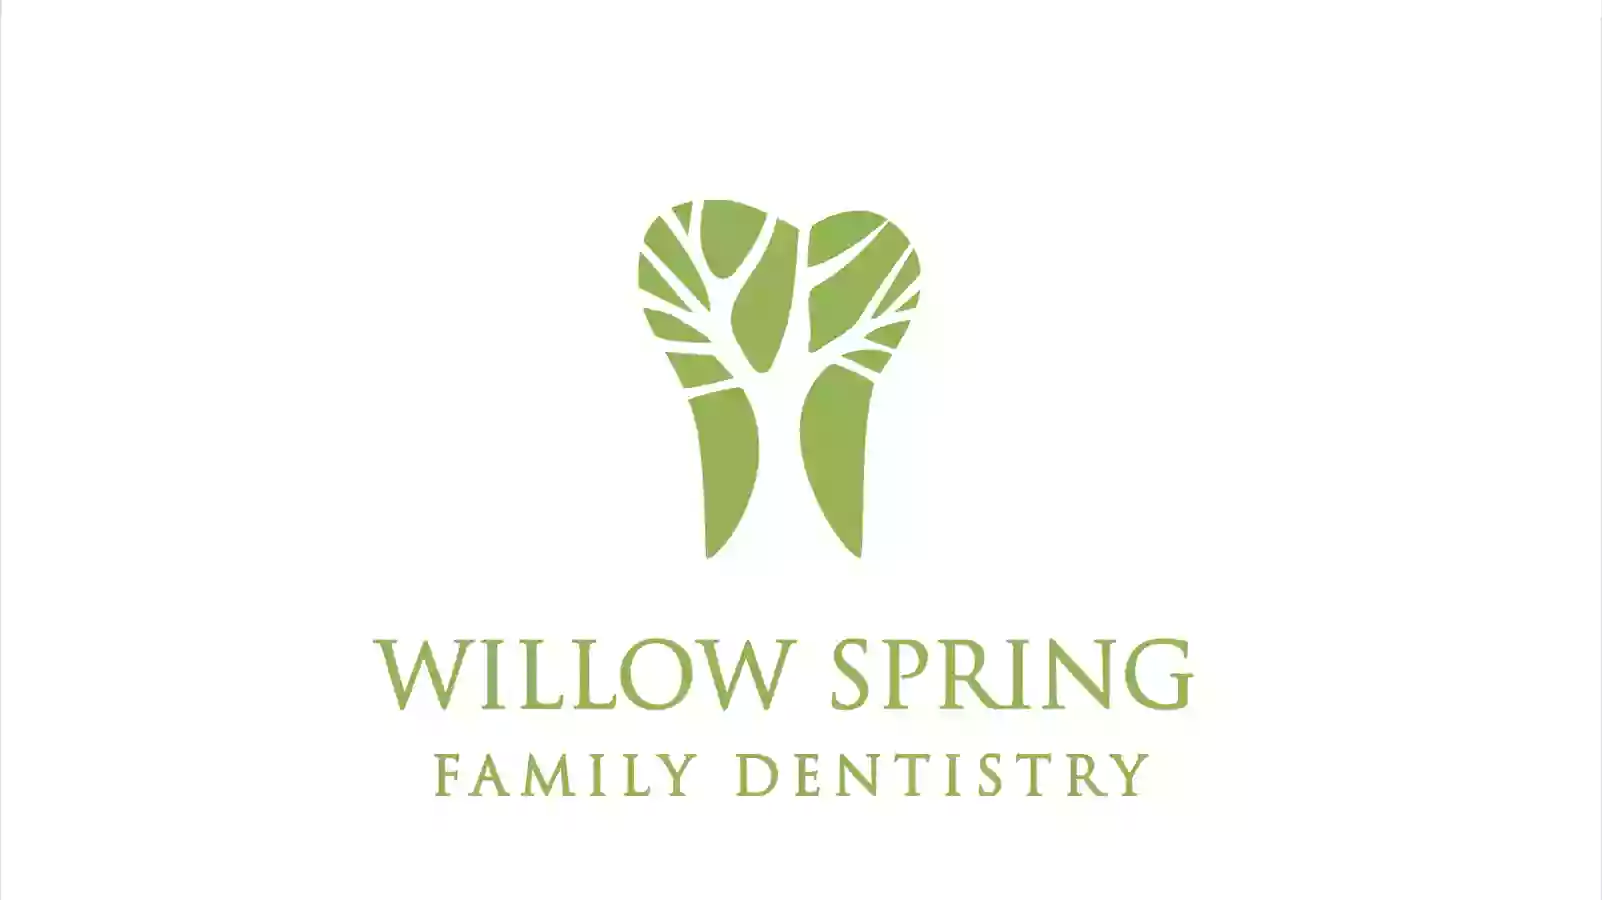 Willow Spring Family Dentistry